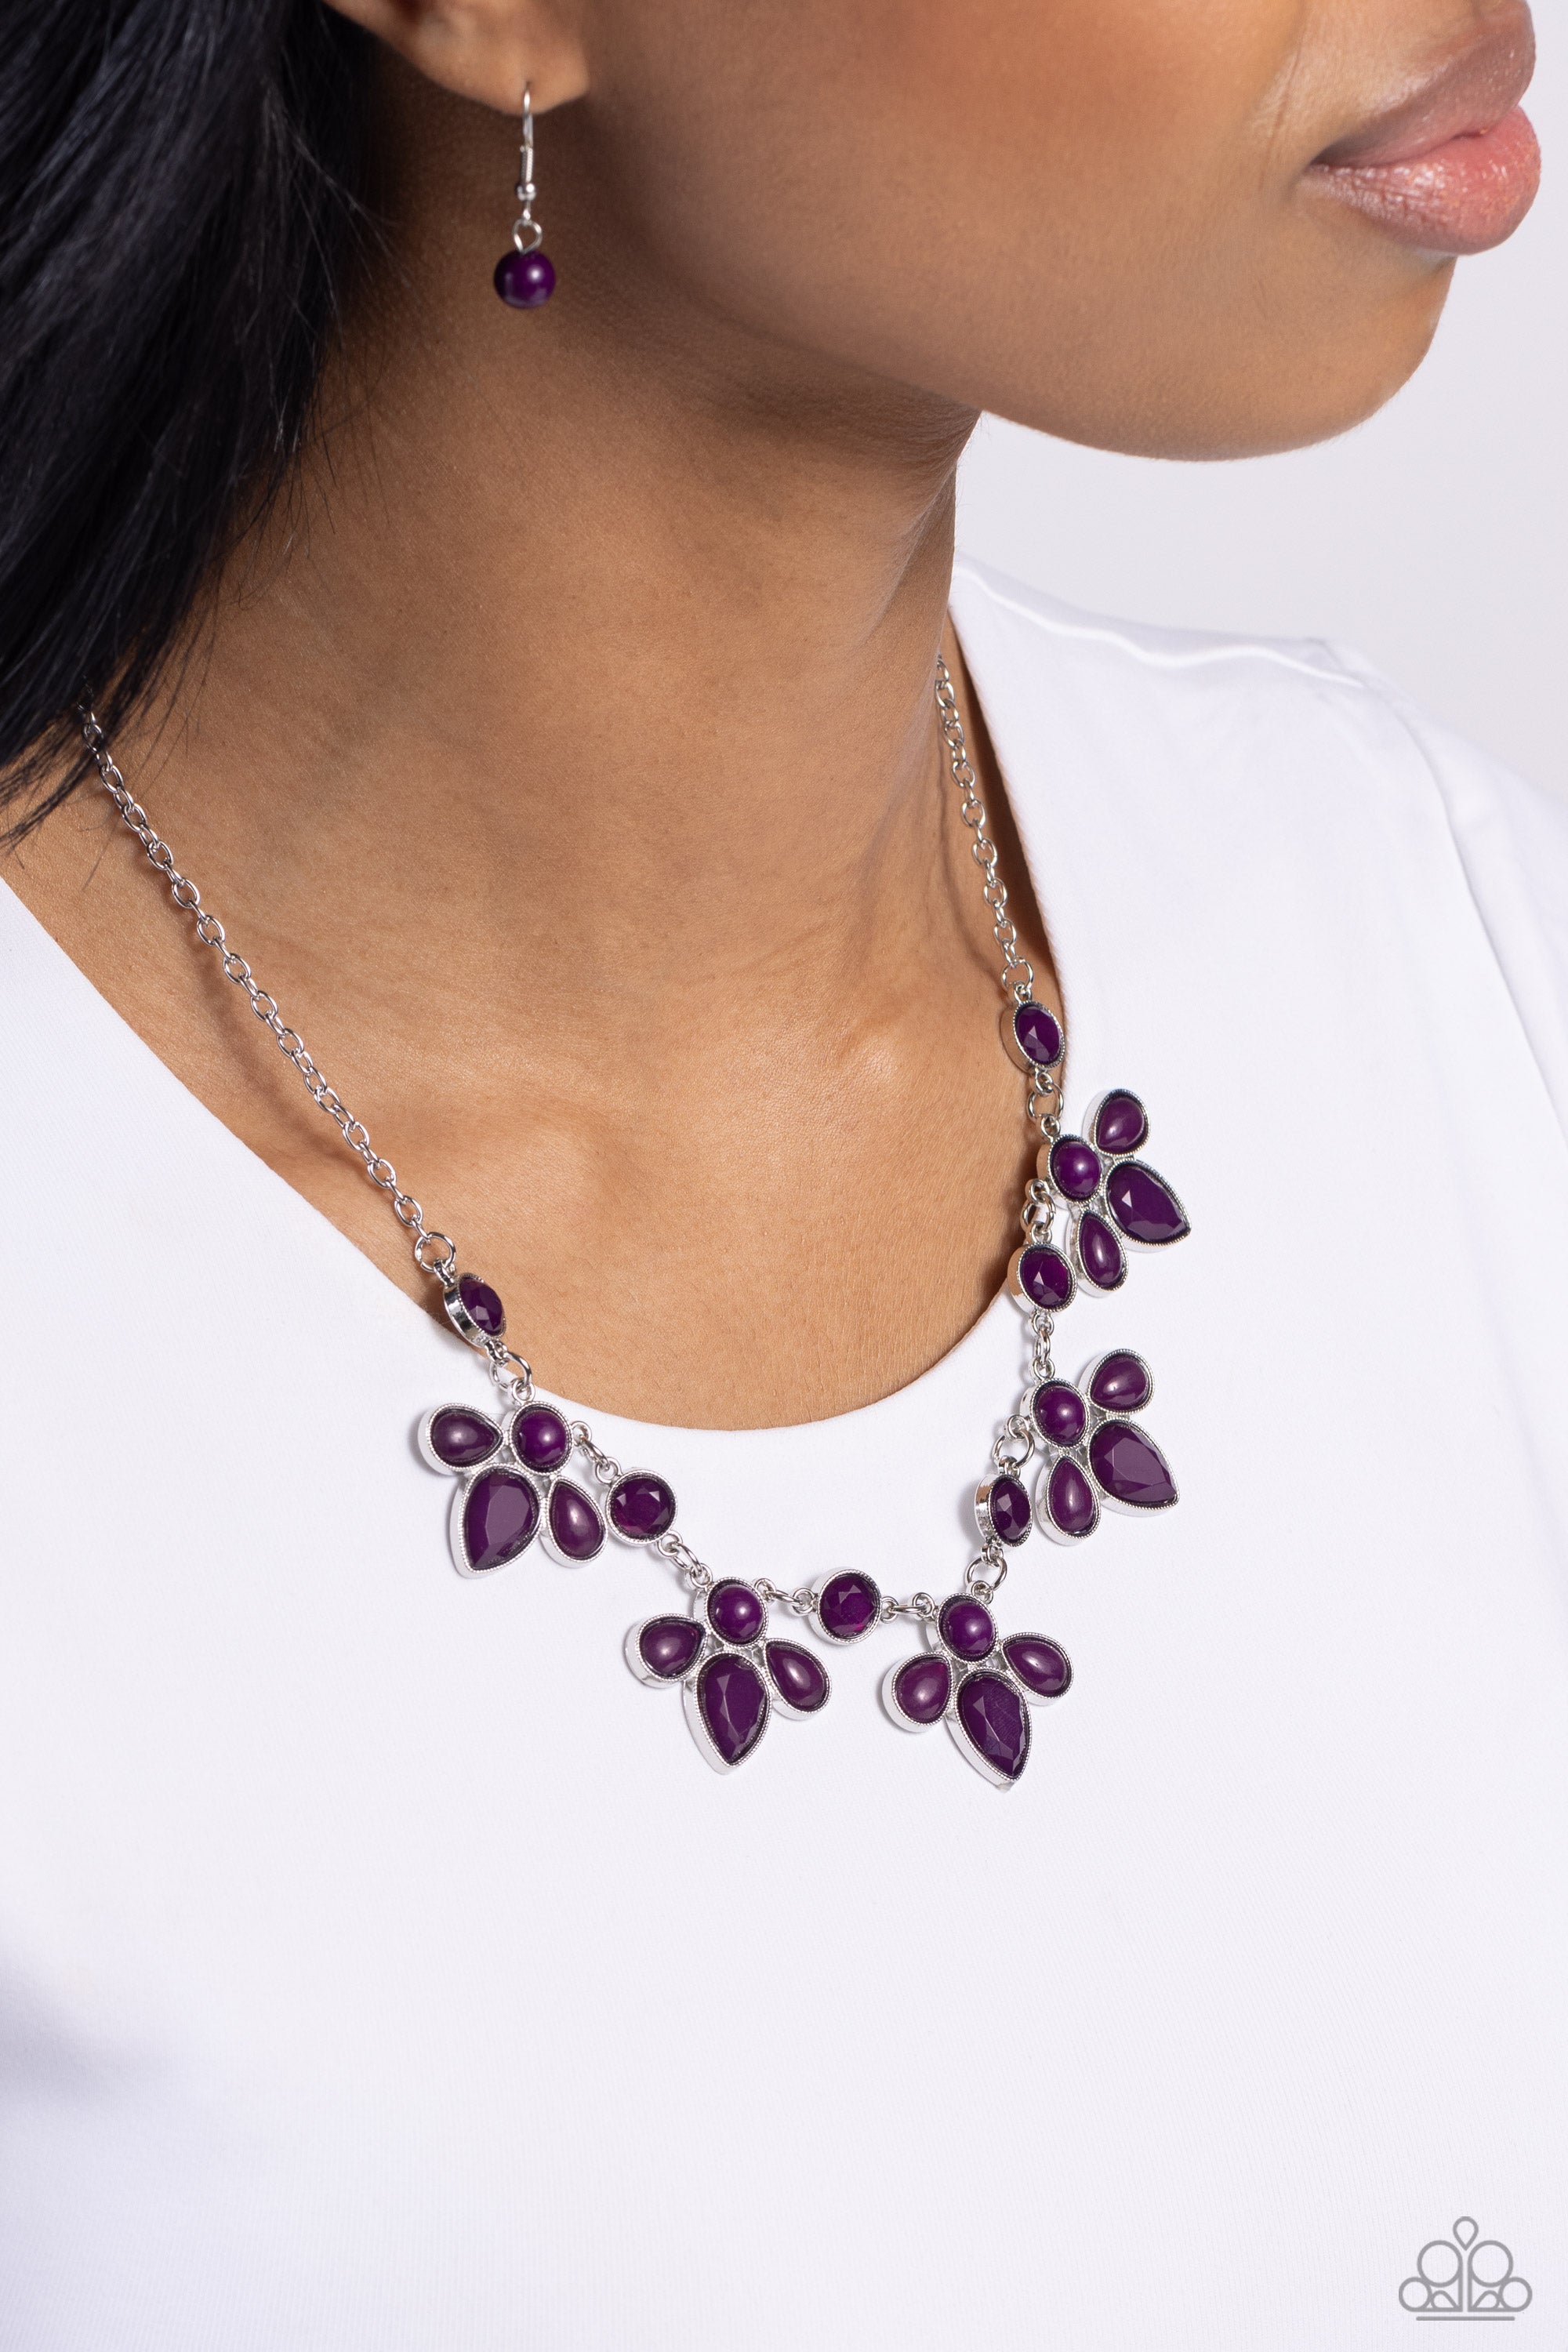 Soft-Hearted Shimmer - Purple Necklace | Paparazzi Accessories | $5.00